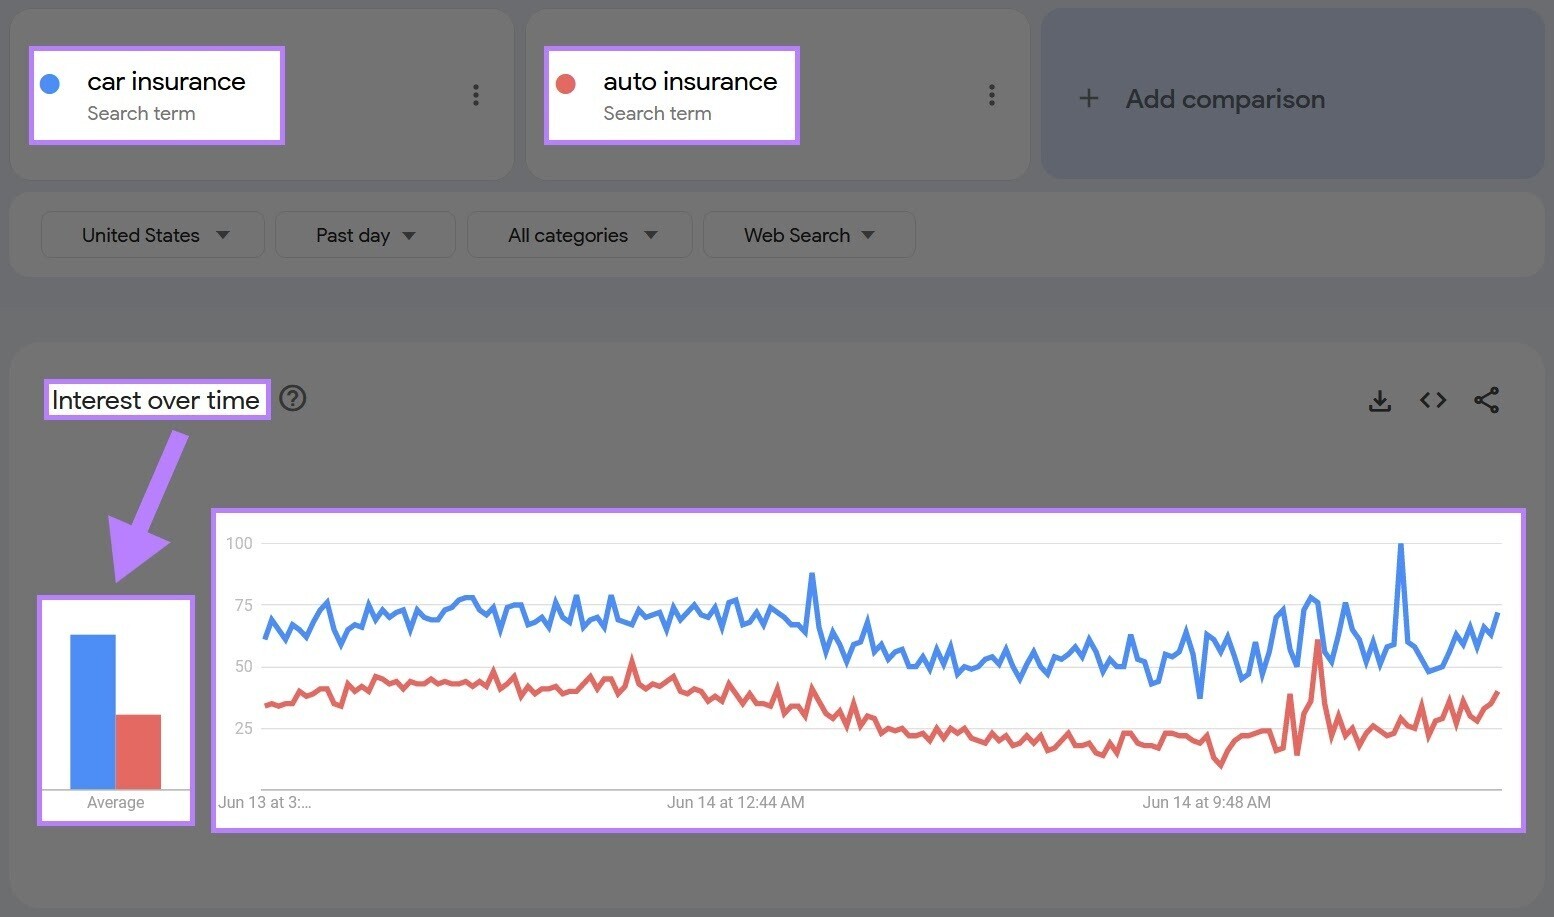 graph showing comparison of interest over time between “car insurance” and “auto insurance”